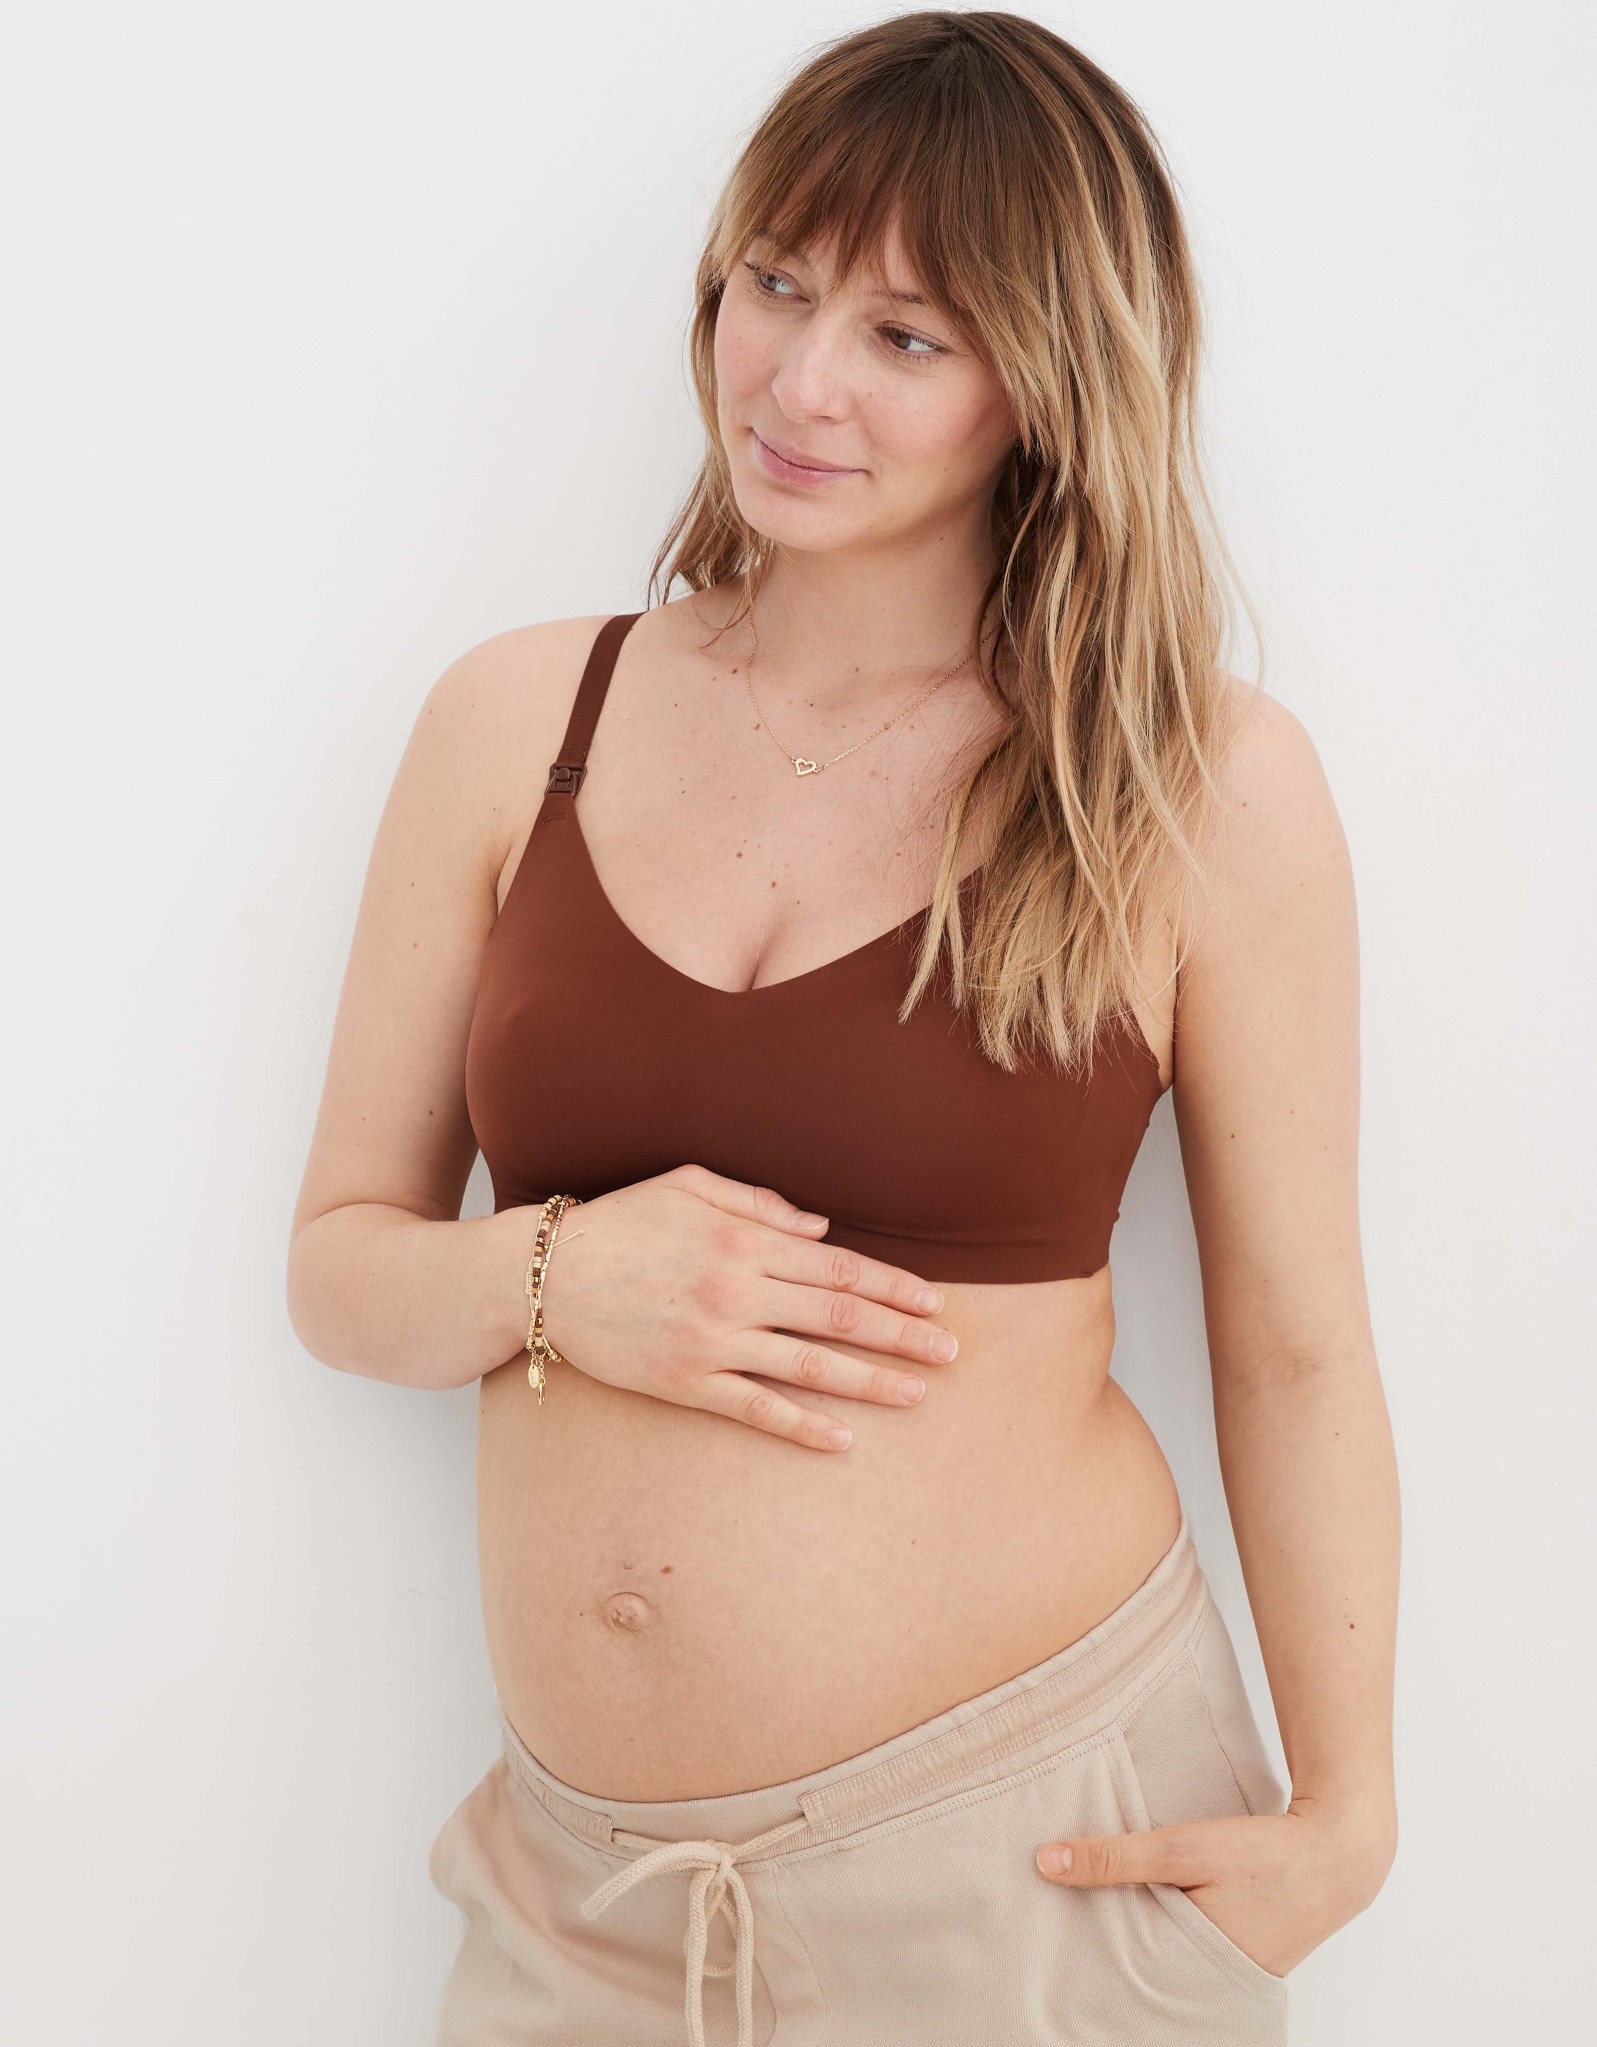 Best Maternity Nursing Bra, The Best Size-Inclusive Maternity Clothes For  All Bodies